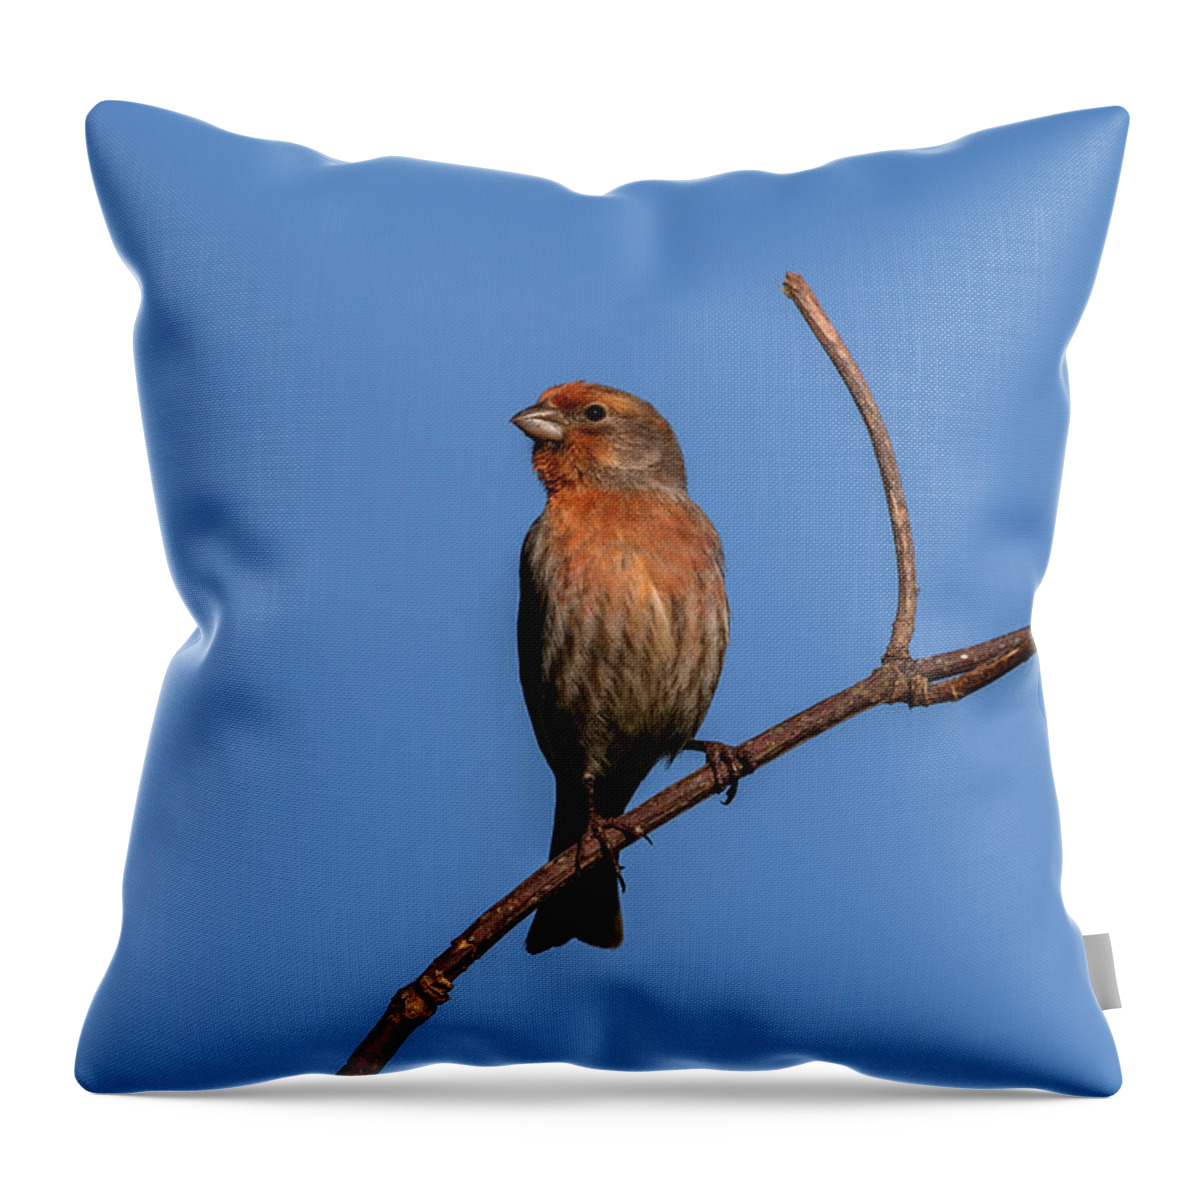 Animals Throw Pillow featuring the photograph Male House Finch by Robert Potts